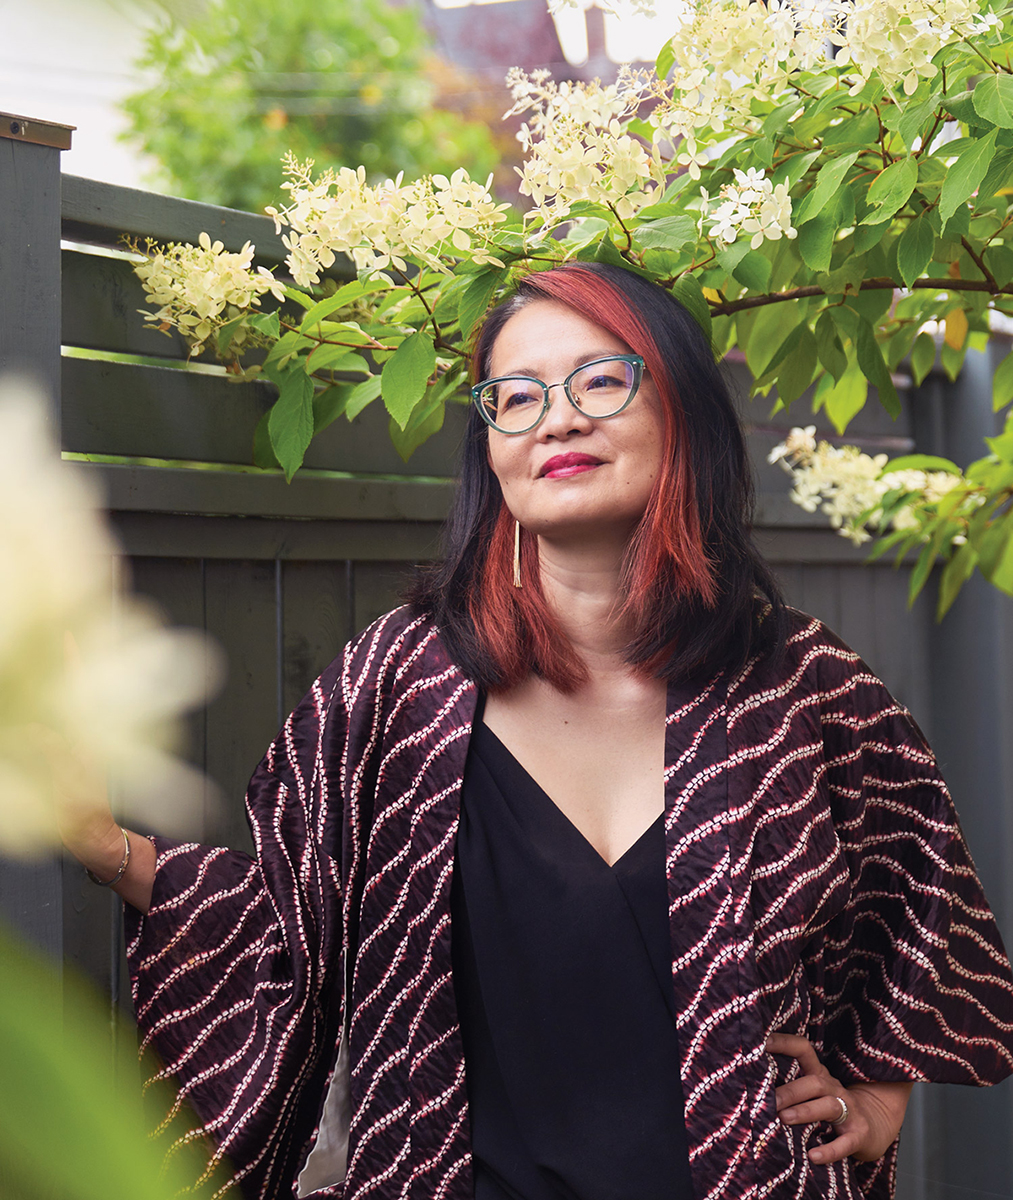 Professor Thy Phu, with thick blue-framed glasses and the front strands of her black hair dyed in red, stands with one hand on her hips and the other resting against a tall grey wooden fence. Behind and above her is a tree branch laden with leaves and white flowers.